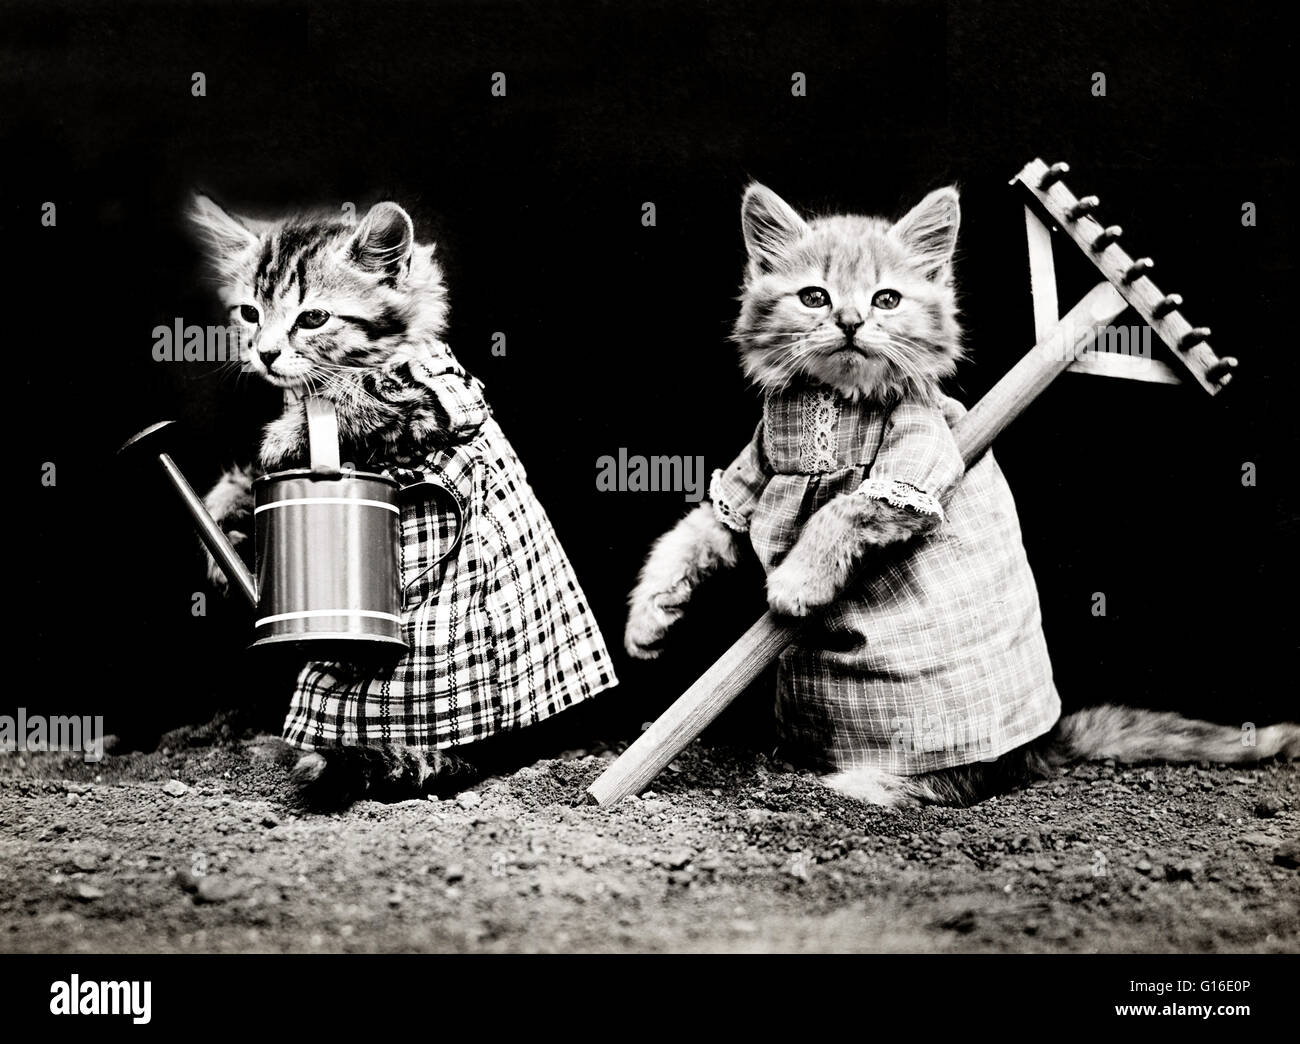 Entitled: 'Planting time' shows two kittens wearing dresses with a watering can and rake. Harry Whittier Frees (1879 - 1953) was an American photographer who photographed live animals dressed and posed in human situations with props. His animal photos wer Stock Photo